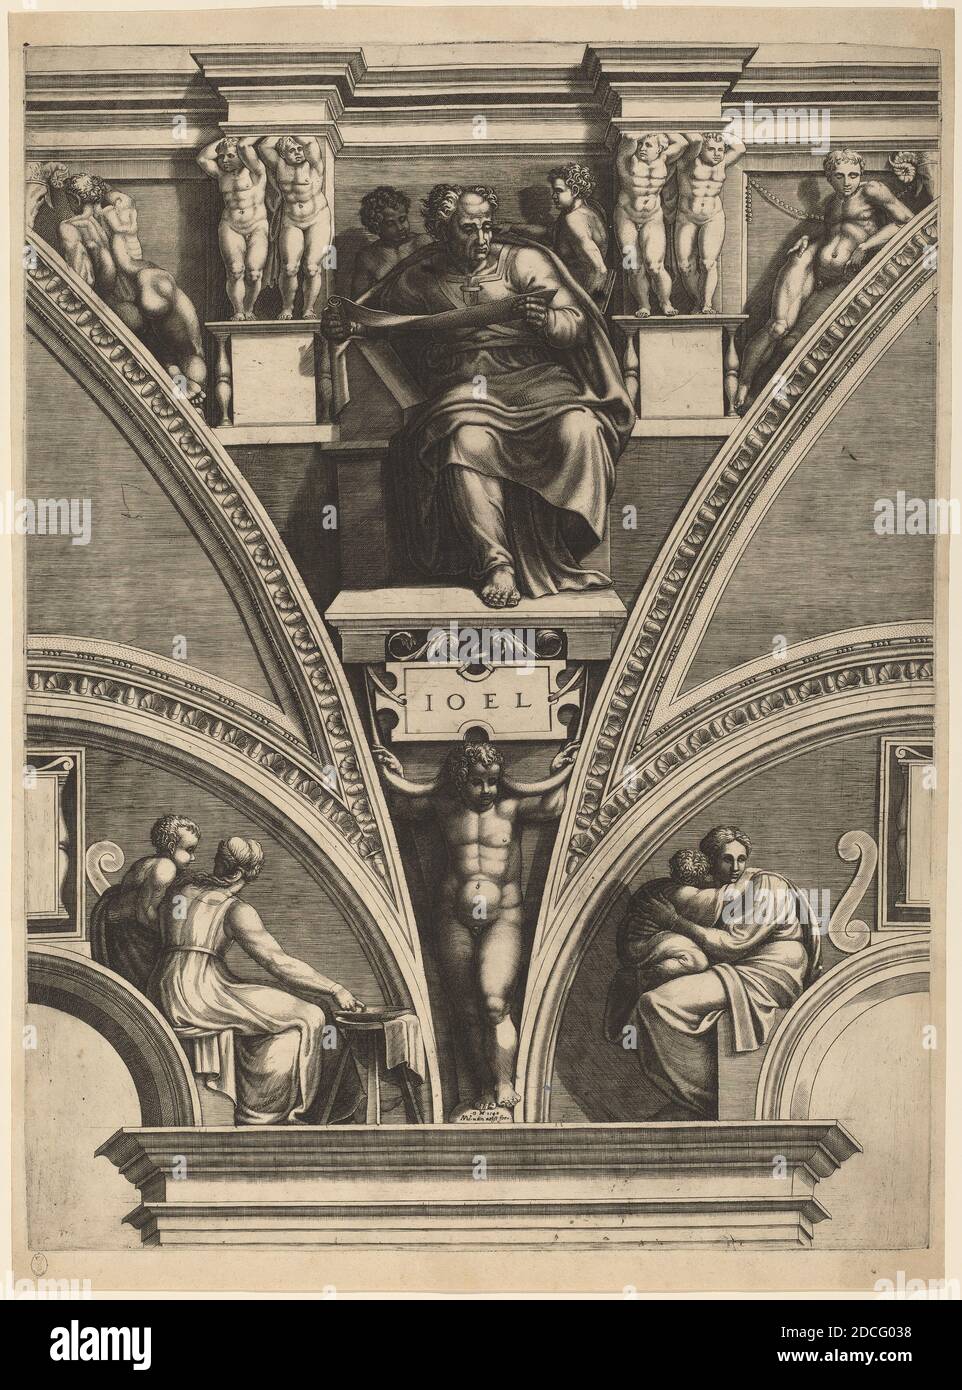 Giorgio Ghisi, (artist), Italian, 1520 - 1582, Michelangelo, (artist after), Florentine, 1475 - 1564, The Prophet Joel, Prophets and Sibyls, (series), early 1570s, engraving on laid paper, plate: 56 x 41.6 cm (22 1/16 x 16 3/8 in.), overall: 59.2 x 43.4 cm (23 5/16 x 17 1/16 in Stock Photo